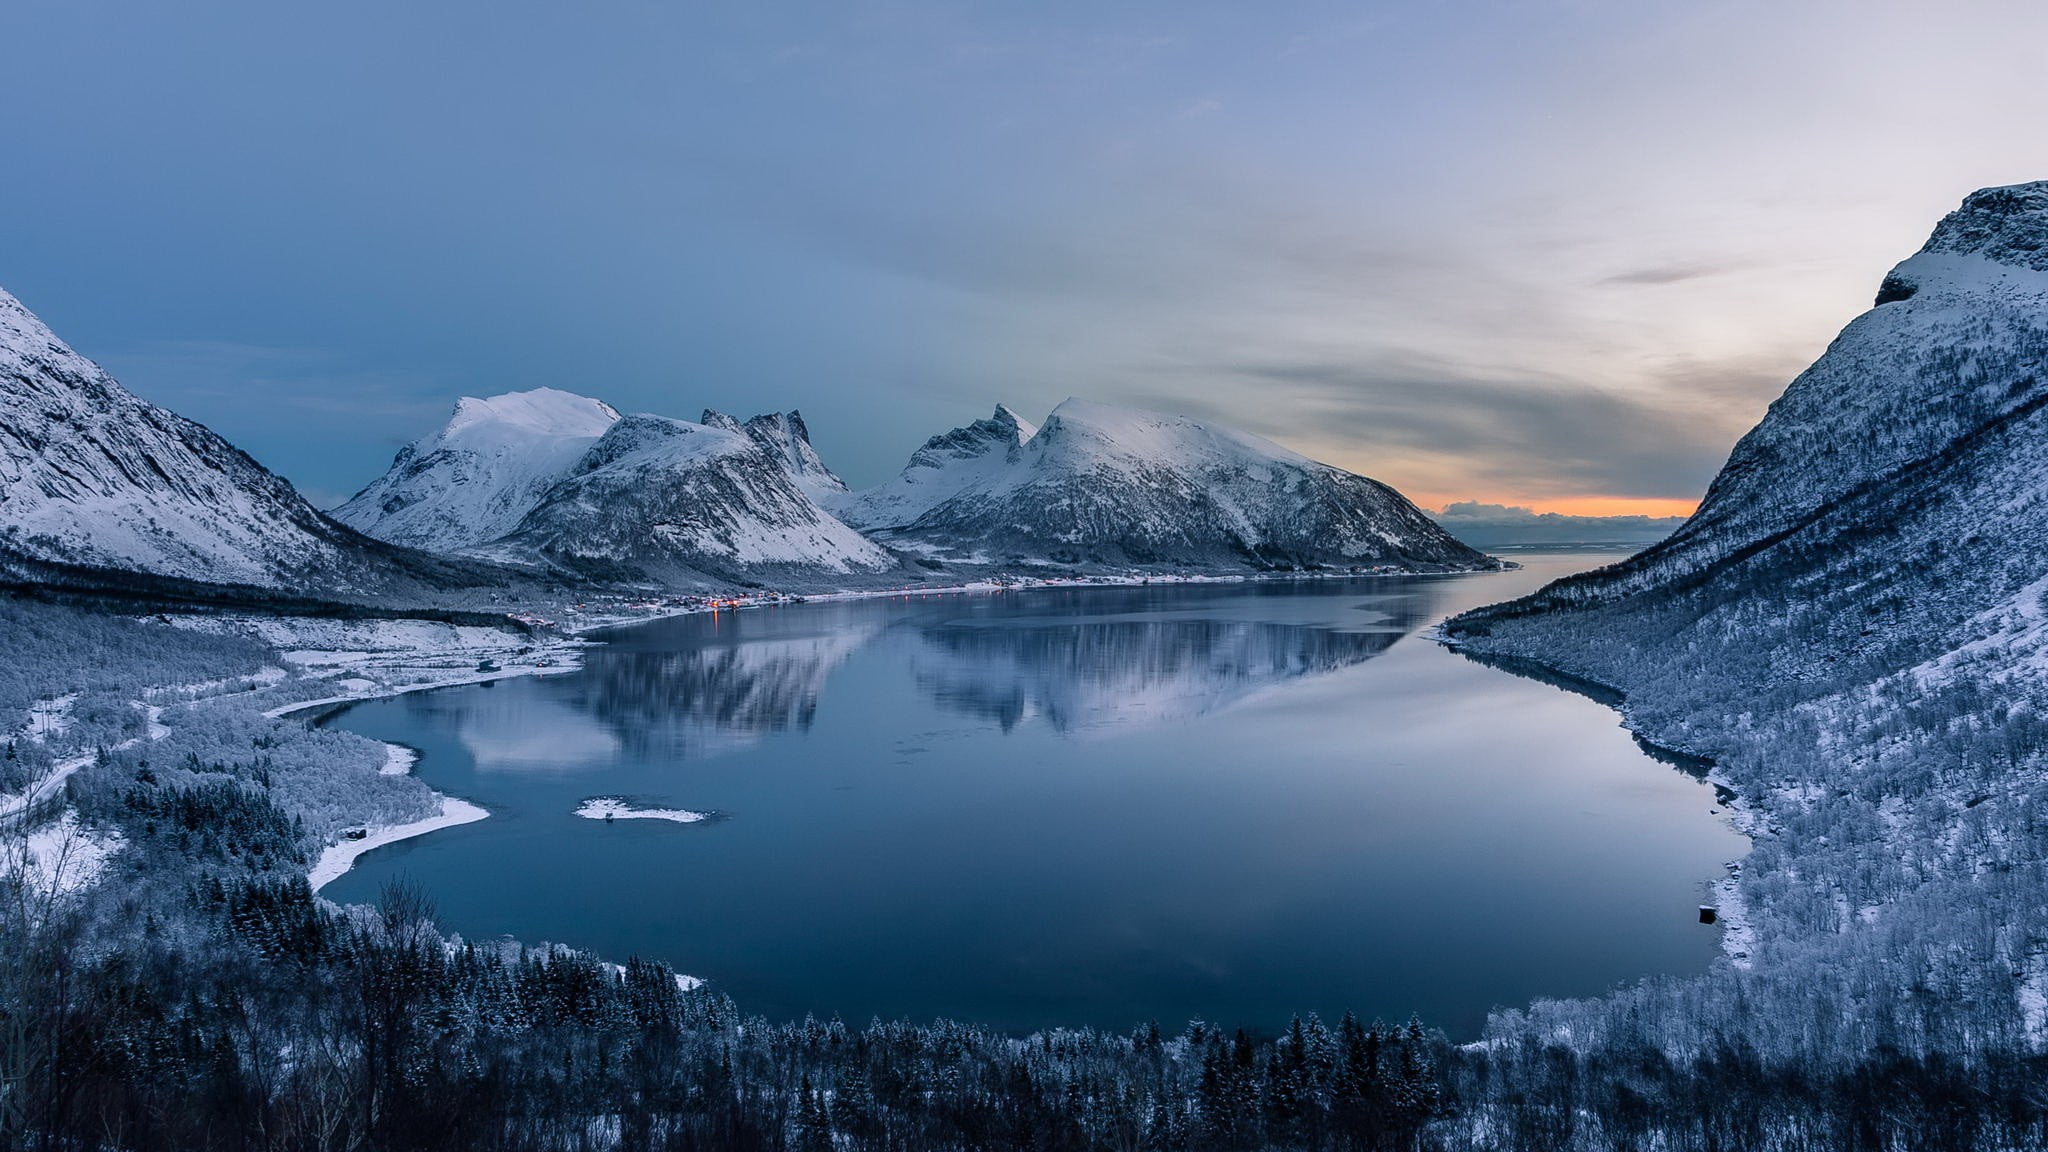 lake surrounded by mountains, mountains, lake, winter, sky